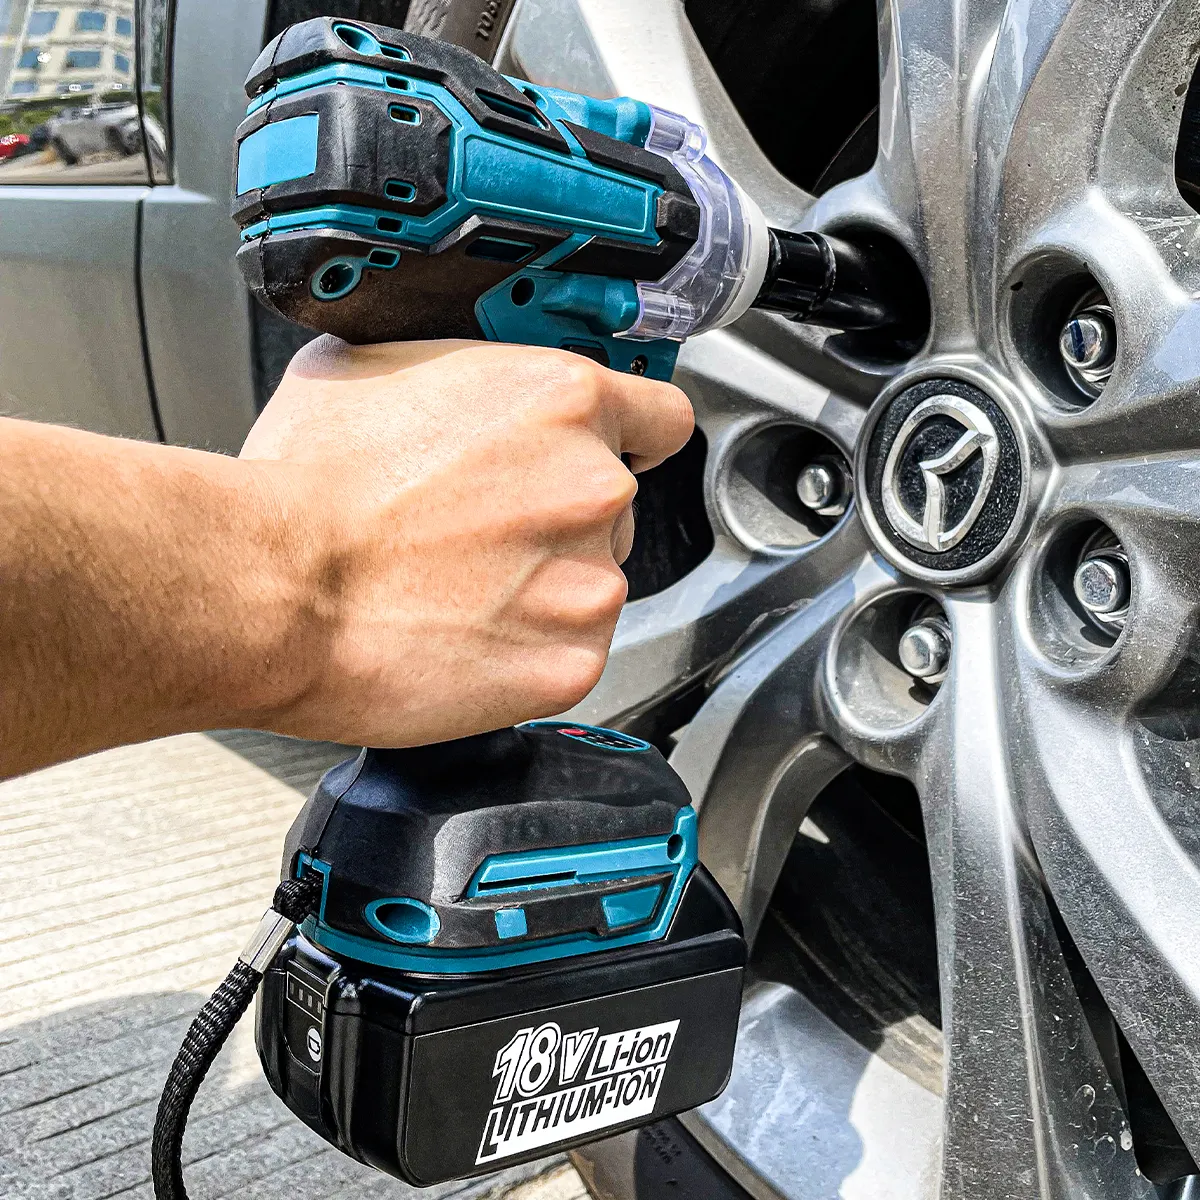 1/2 Impact Wrench For Trucks With Battery Powered Electric Wrench Torque Impact Power Wrenches